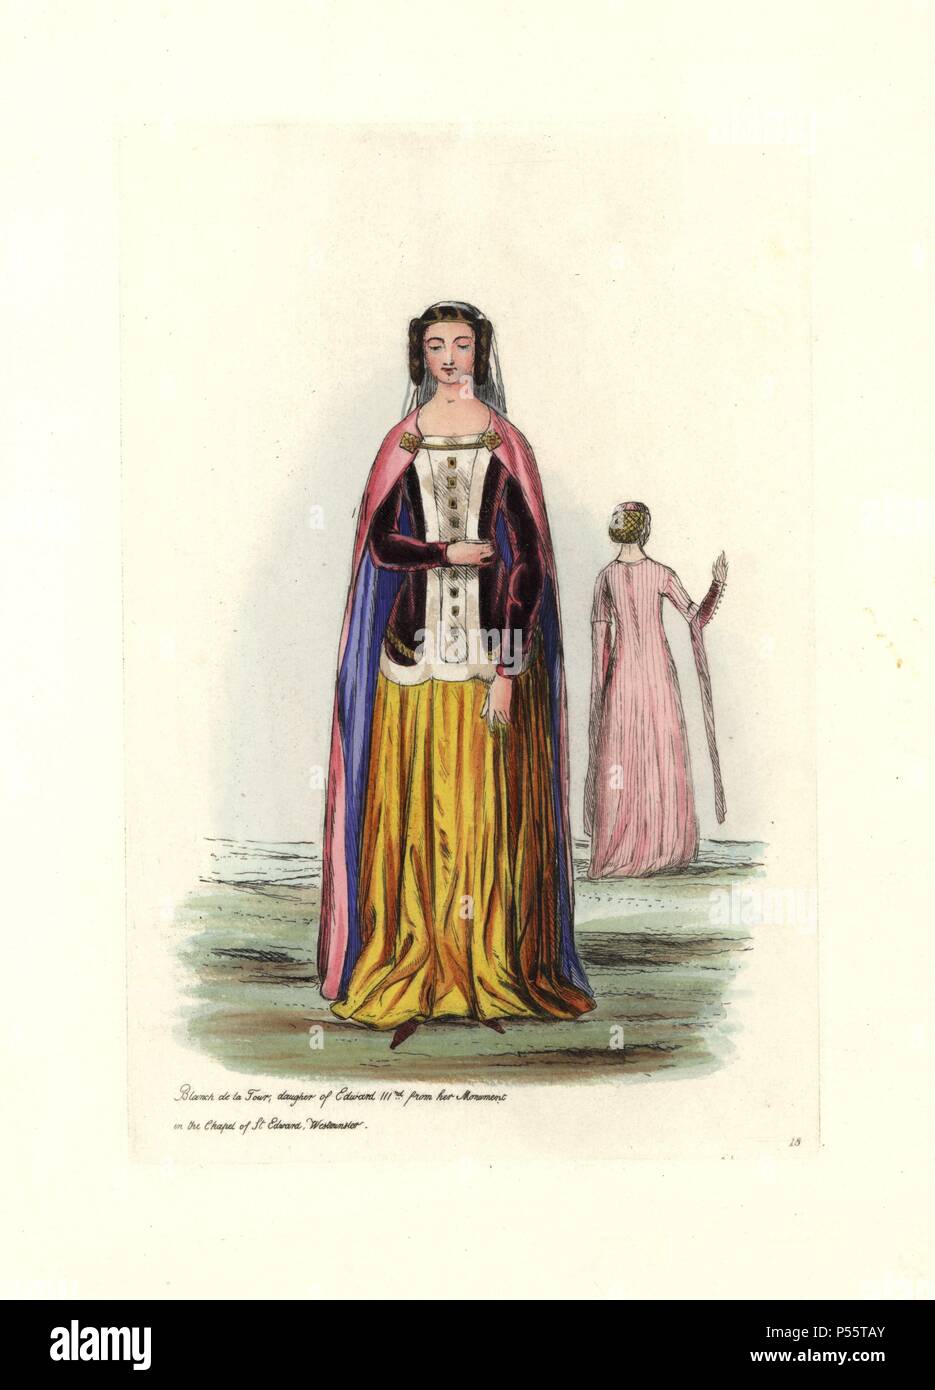 Blanch de la Tour, daughter of Edward III, from her monument in the Chapel of St. Edward, Westminster. Background figure from manuscript of the time. Handcolored engraving from "Civil Costume of England from the Conquest to the Present Period" drawn by Charles Martin and etched by Leopold Martin, London, Henry Bohn, 1842. The costumes were drawn from tapestries, monumental effigies, illuminated manuscripts and portraits. Charles and Leopold Martin were the sons of the romantic artist and mezzotint engraver John Martin (1789-1854). Stock Photo